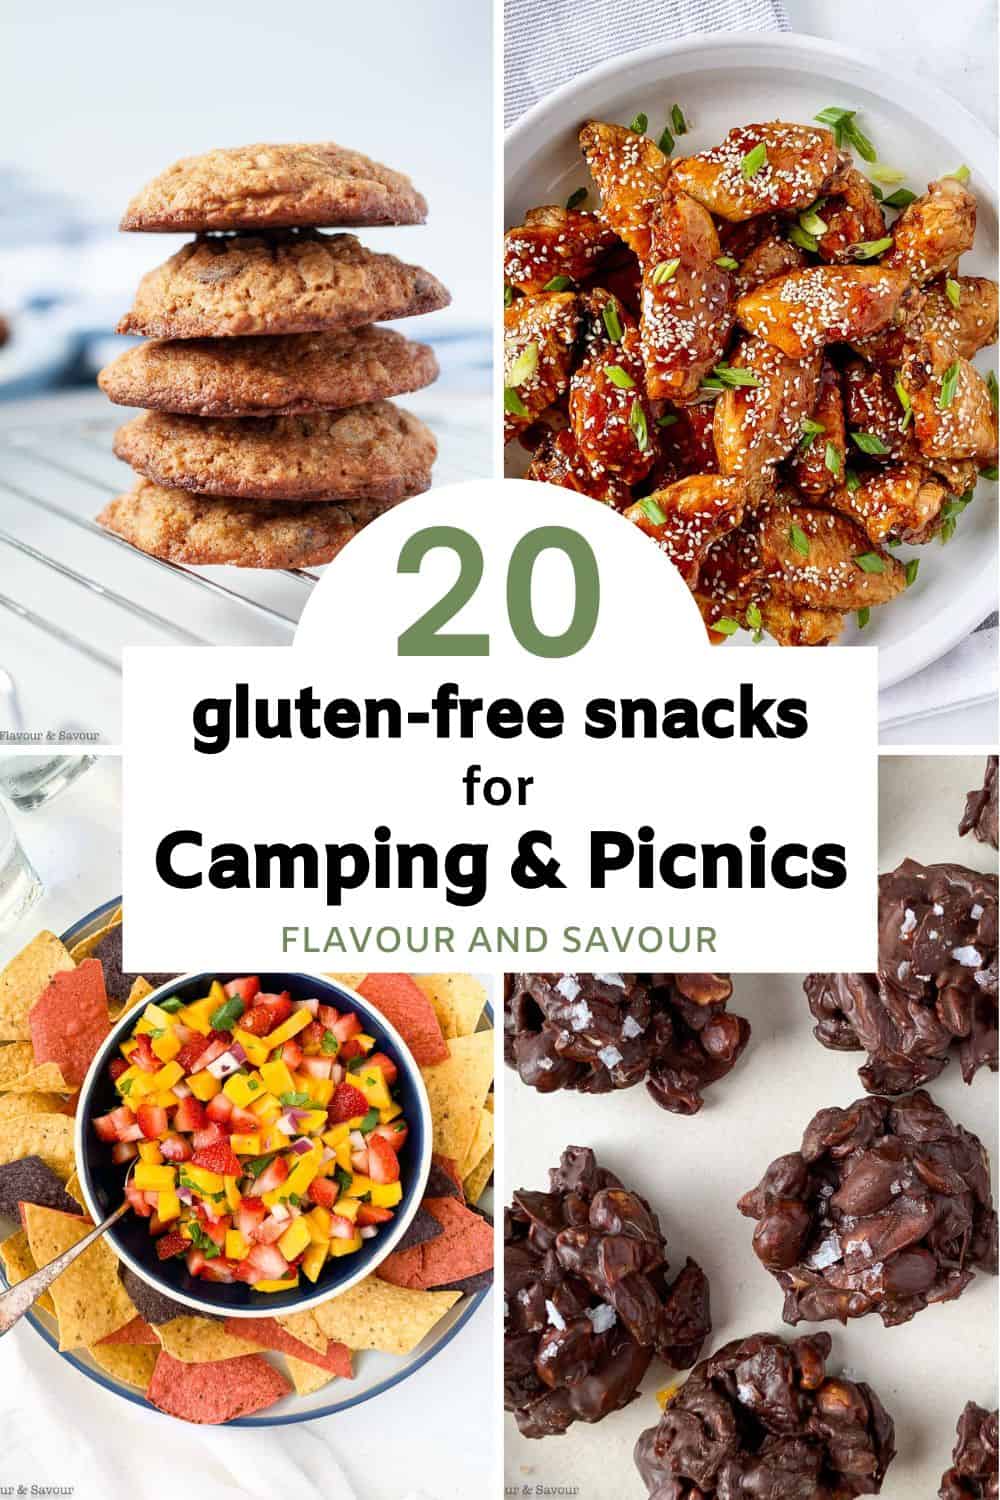 Image with text overlay for 20 gluten-free snacks for camping and picnics.